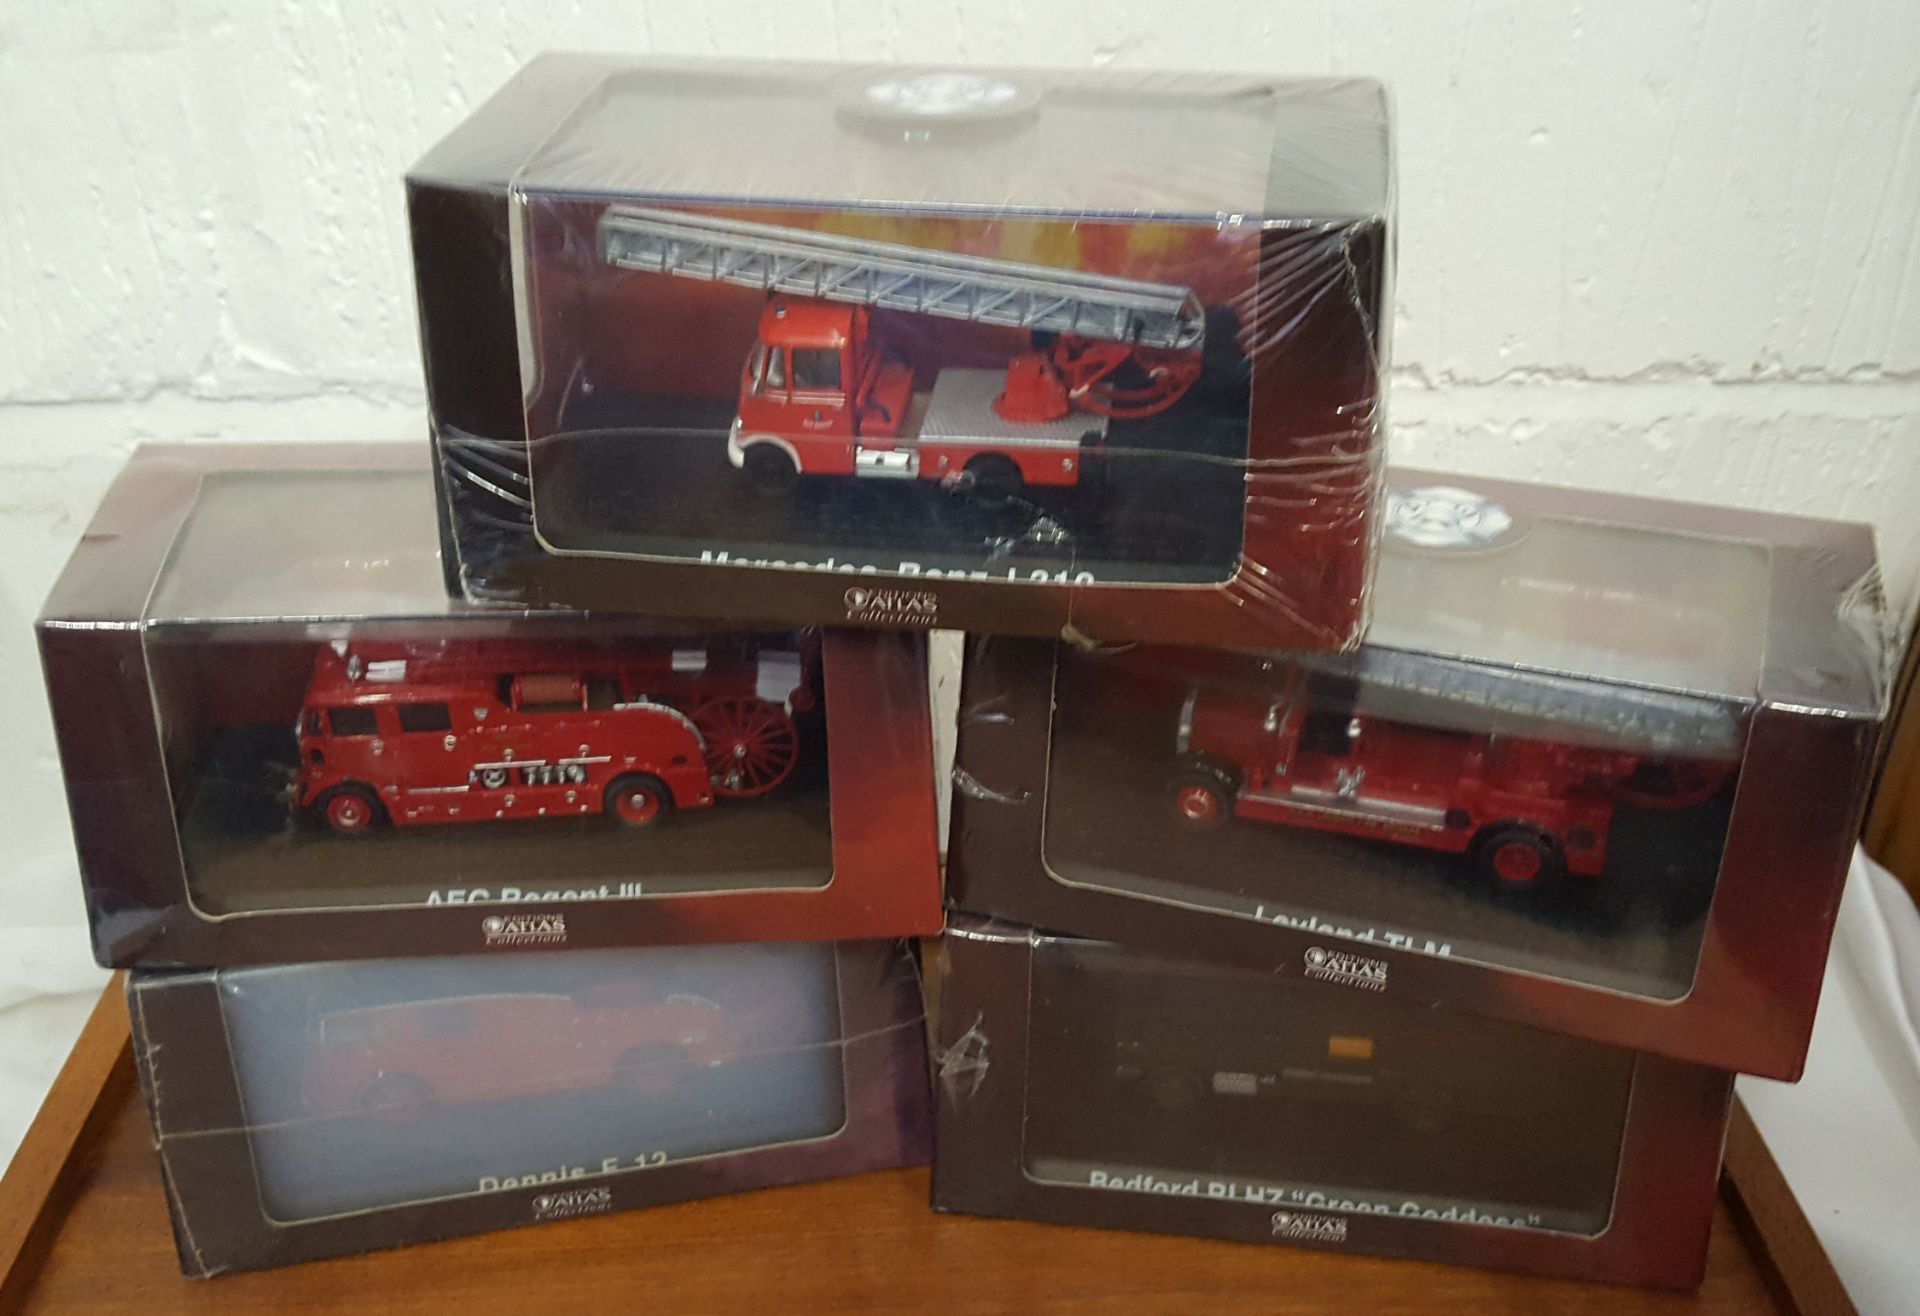 5 x Vintage Retro Collectable Atlas Die Cast Toy Fire Engines Boxed